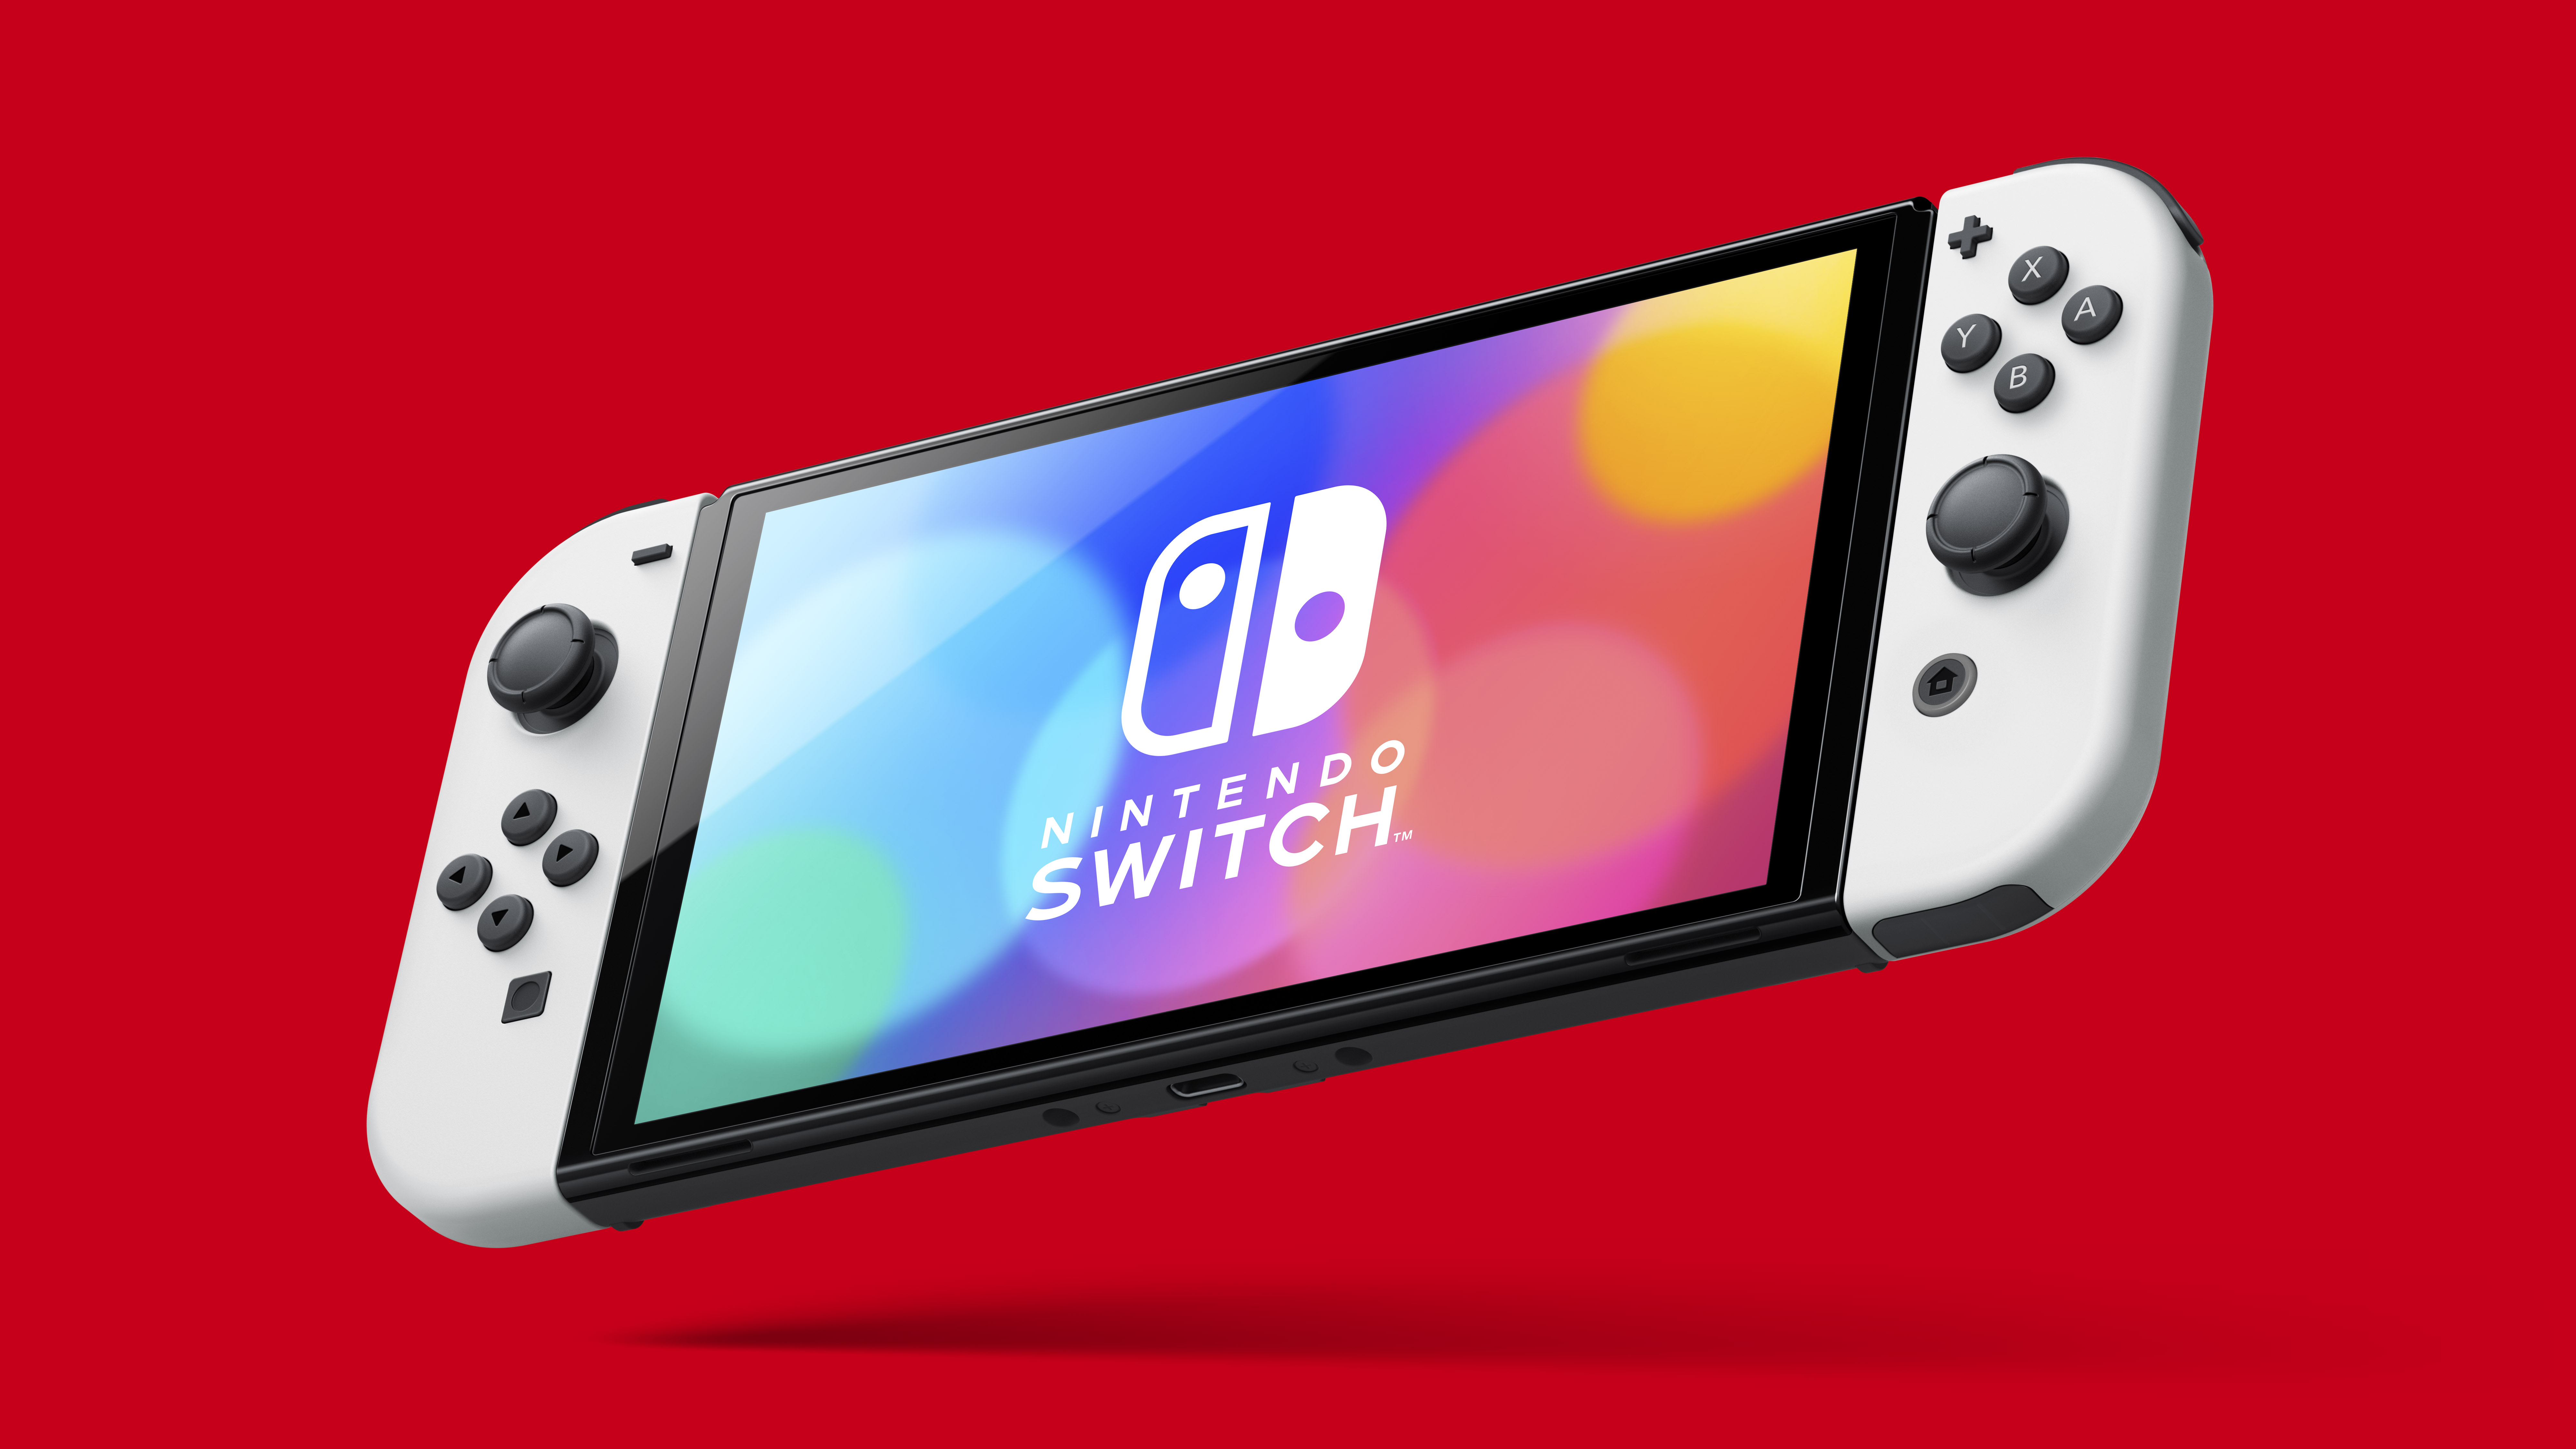 Nintendo Switch OLED review: The best Switch yet